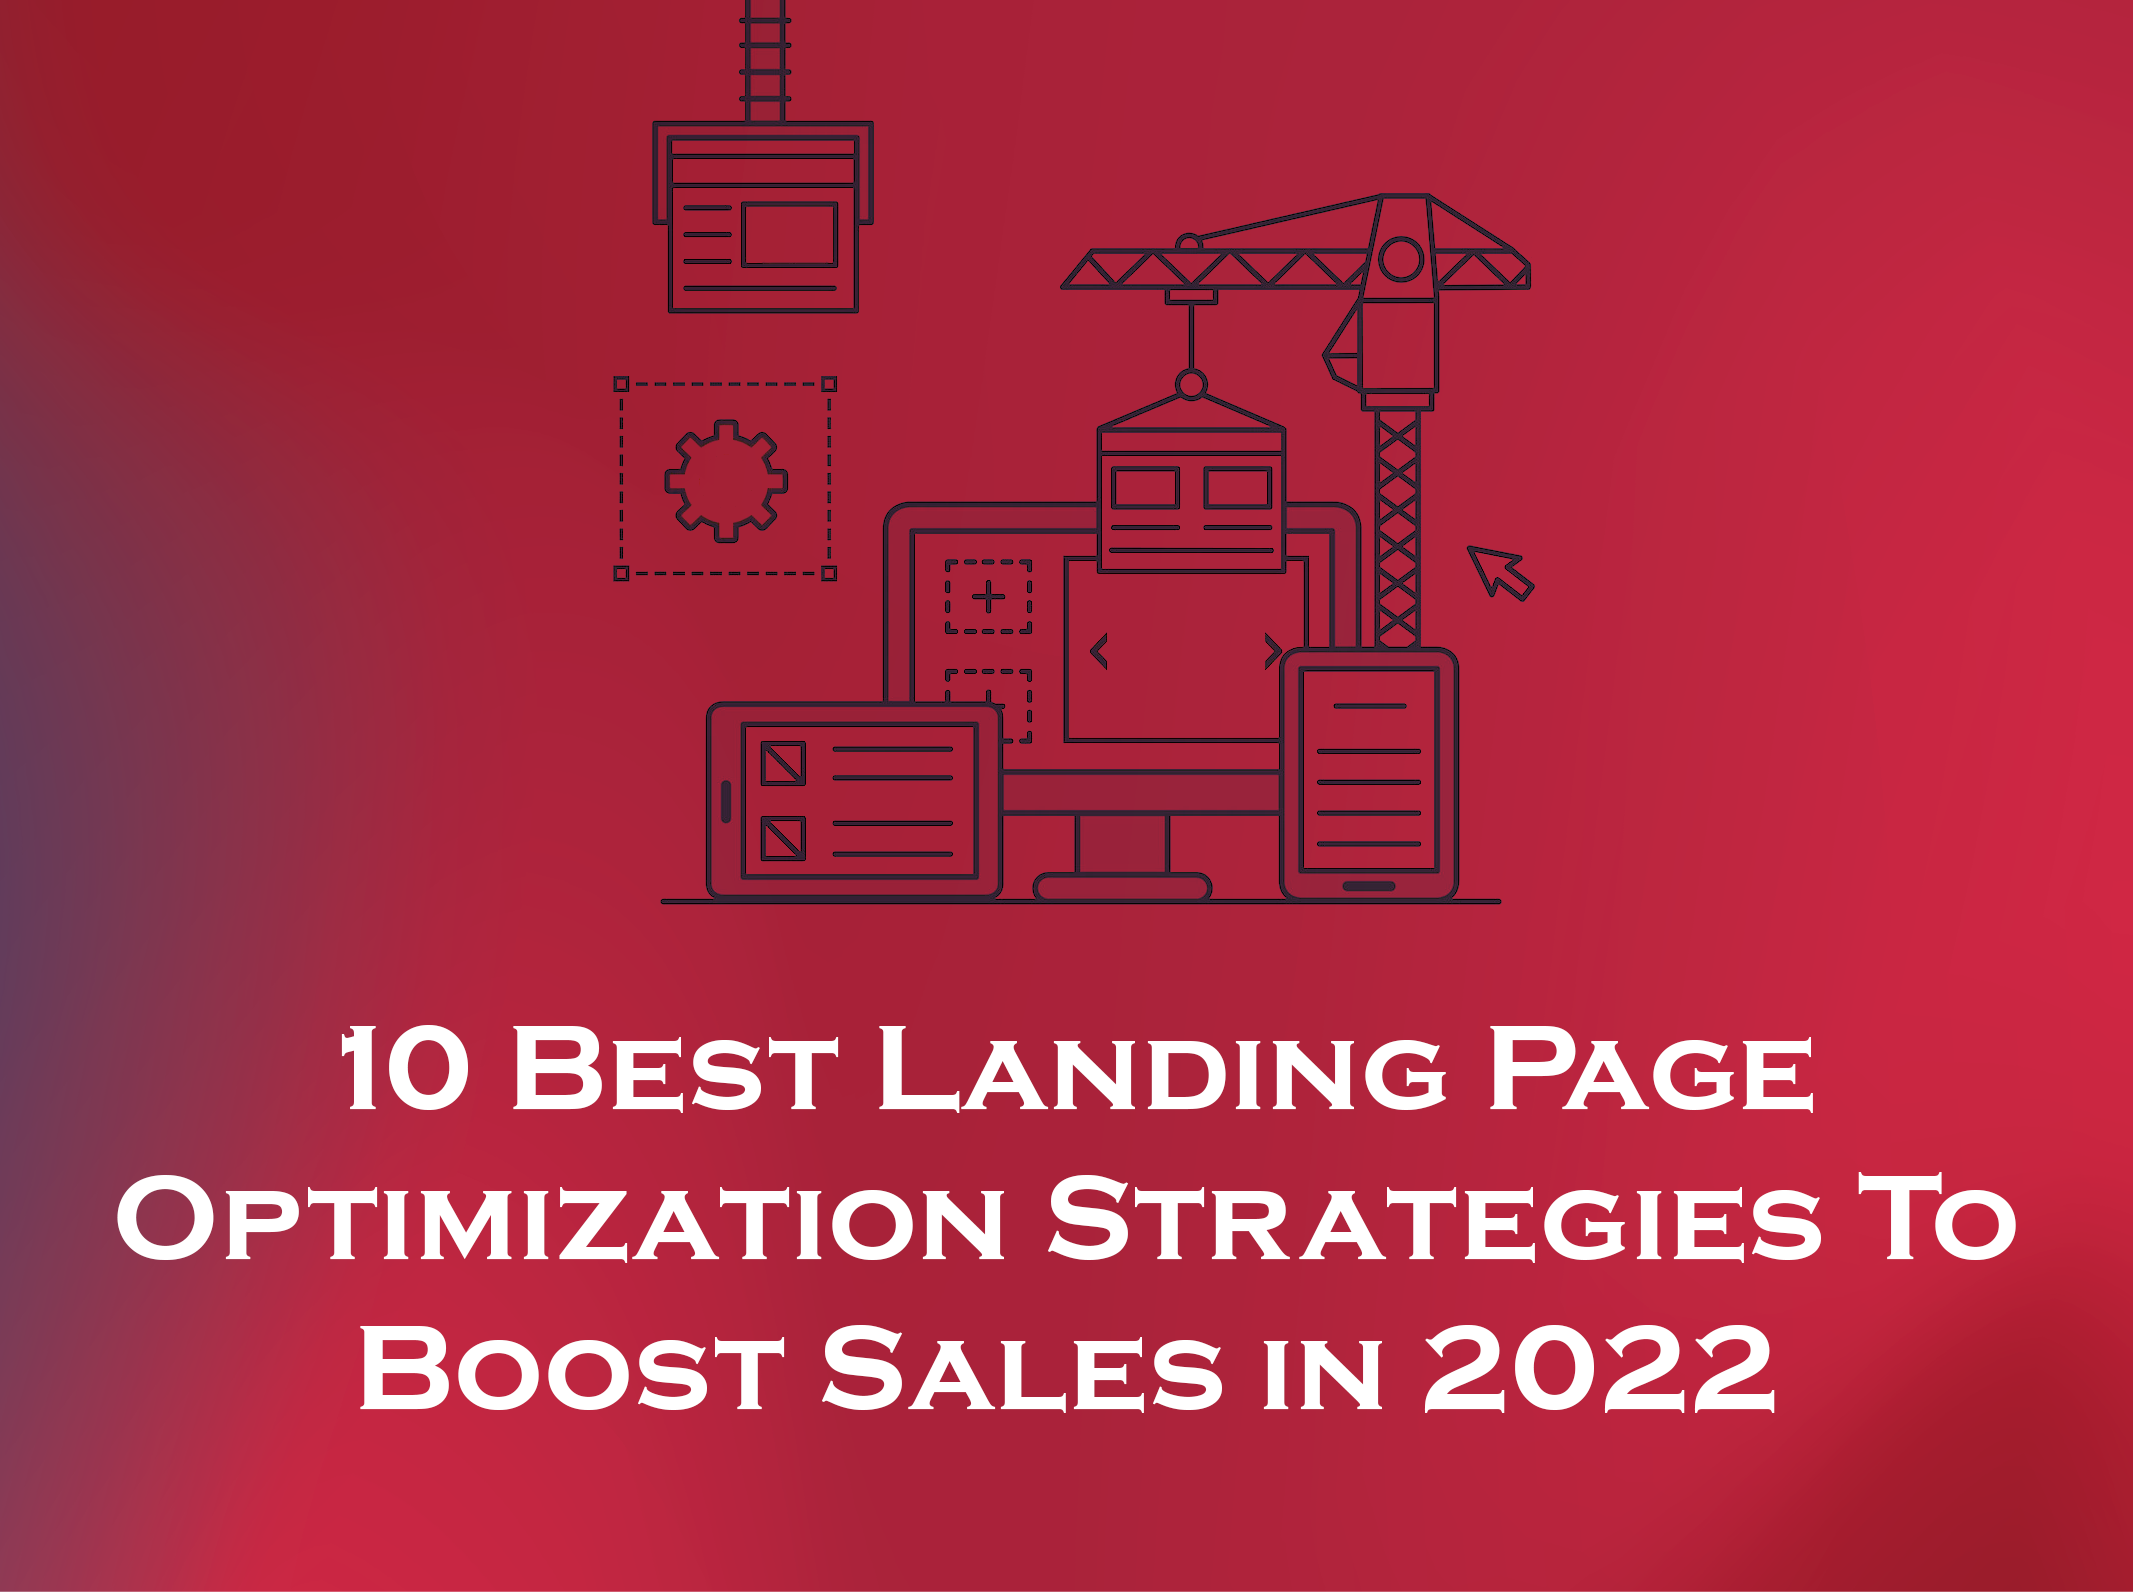 10 Best Landing Page Optimization Strategies To Boost Sales in 2022